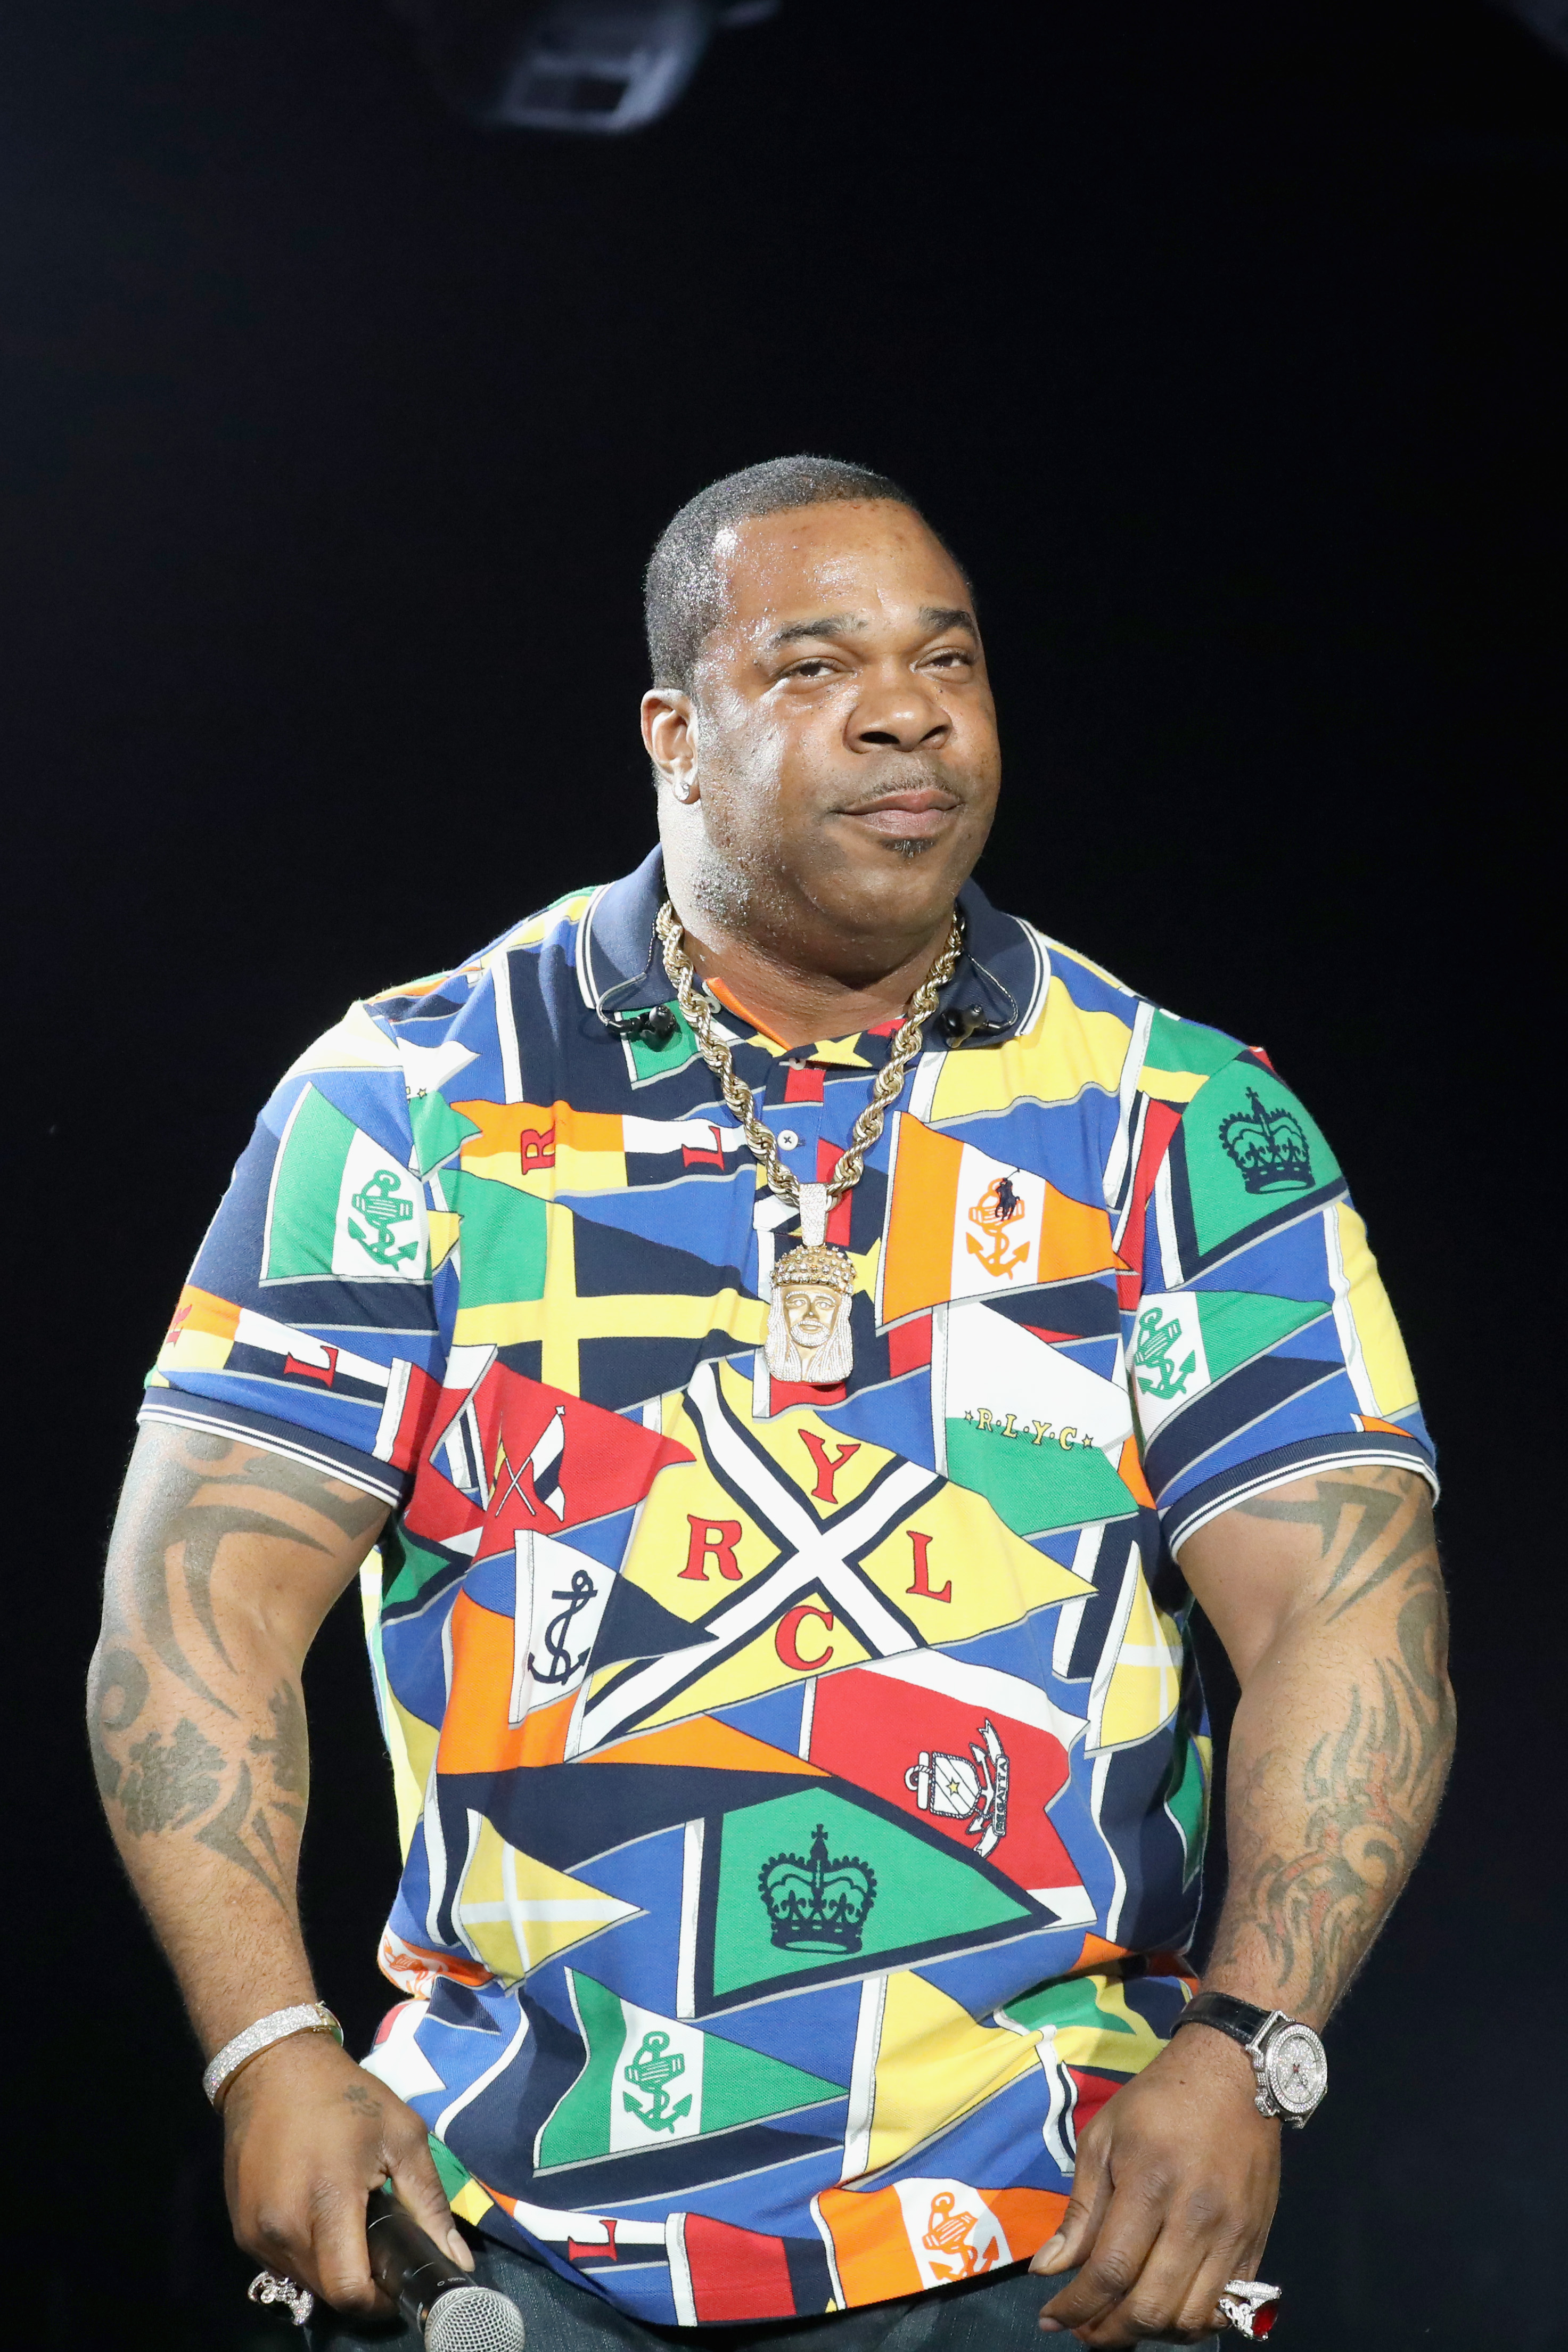 Busta Rhymes performs onstage at Something in the Air - Day 2 on April 27, 2019, in Virginia Beach City. | Source: Getty Images